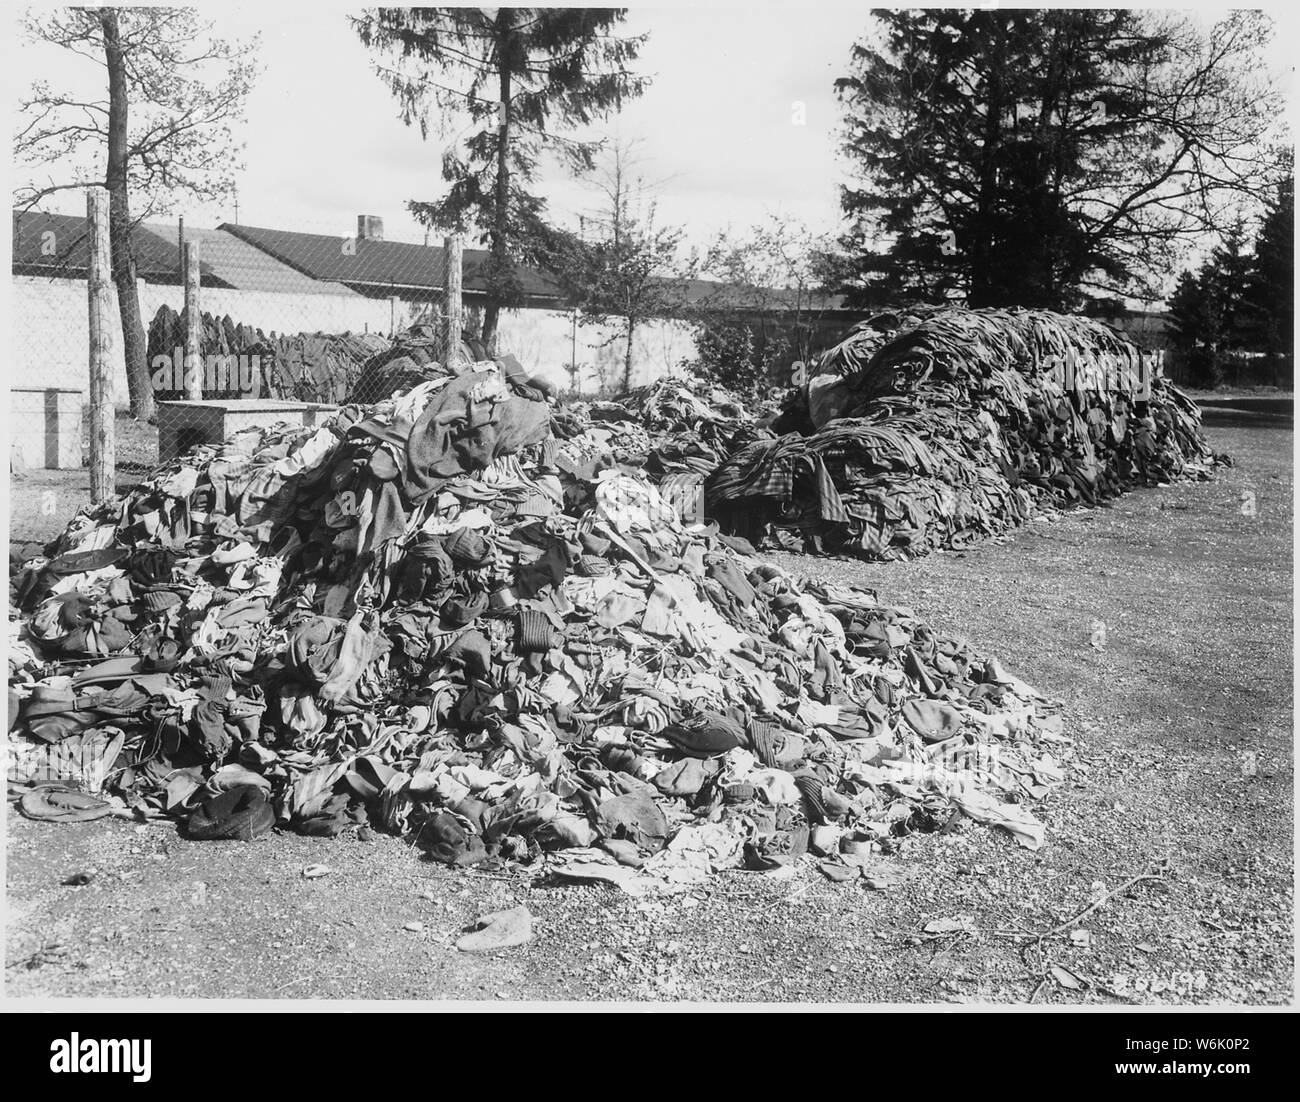 Photograph of Clothes That Belonged to Prisoners of the Dachau Concentration Camp; Scope and content:  Original caption: This pile of clothes belonged to prisoners of the Dachau concentration camp, recently liberated by troops of the U.S. Seventh Army. Slave laborers were compelled to strip before they were killed. Germany. General notes:  Use War and Conflict Number 1129 when ordering a reproduction or requesting information about this image. Stock Photo